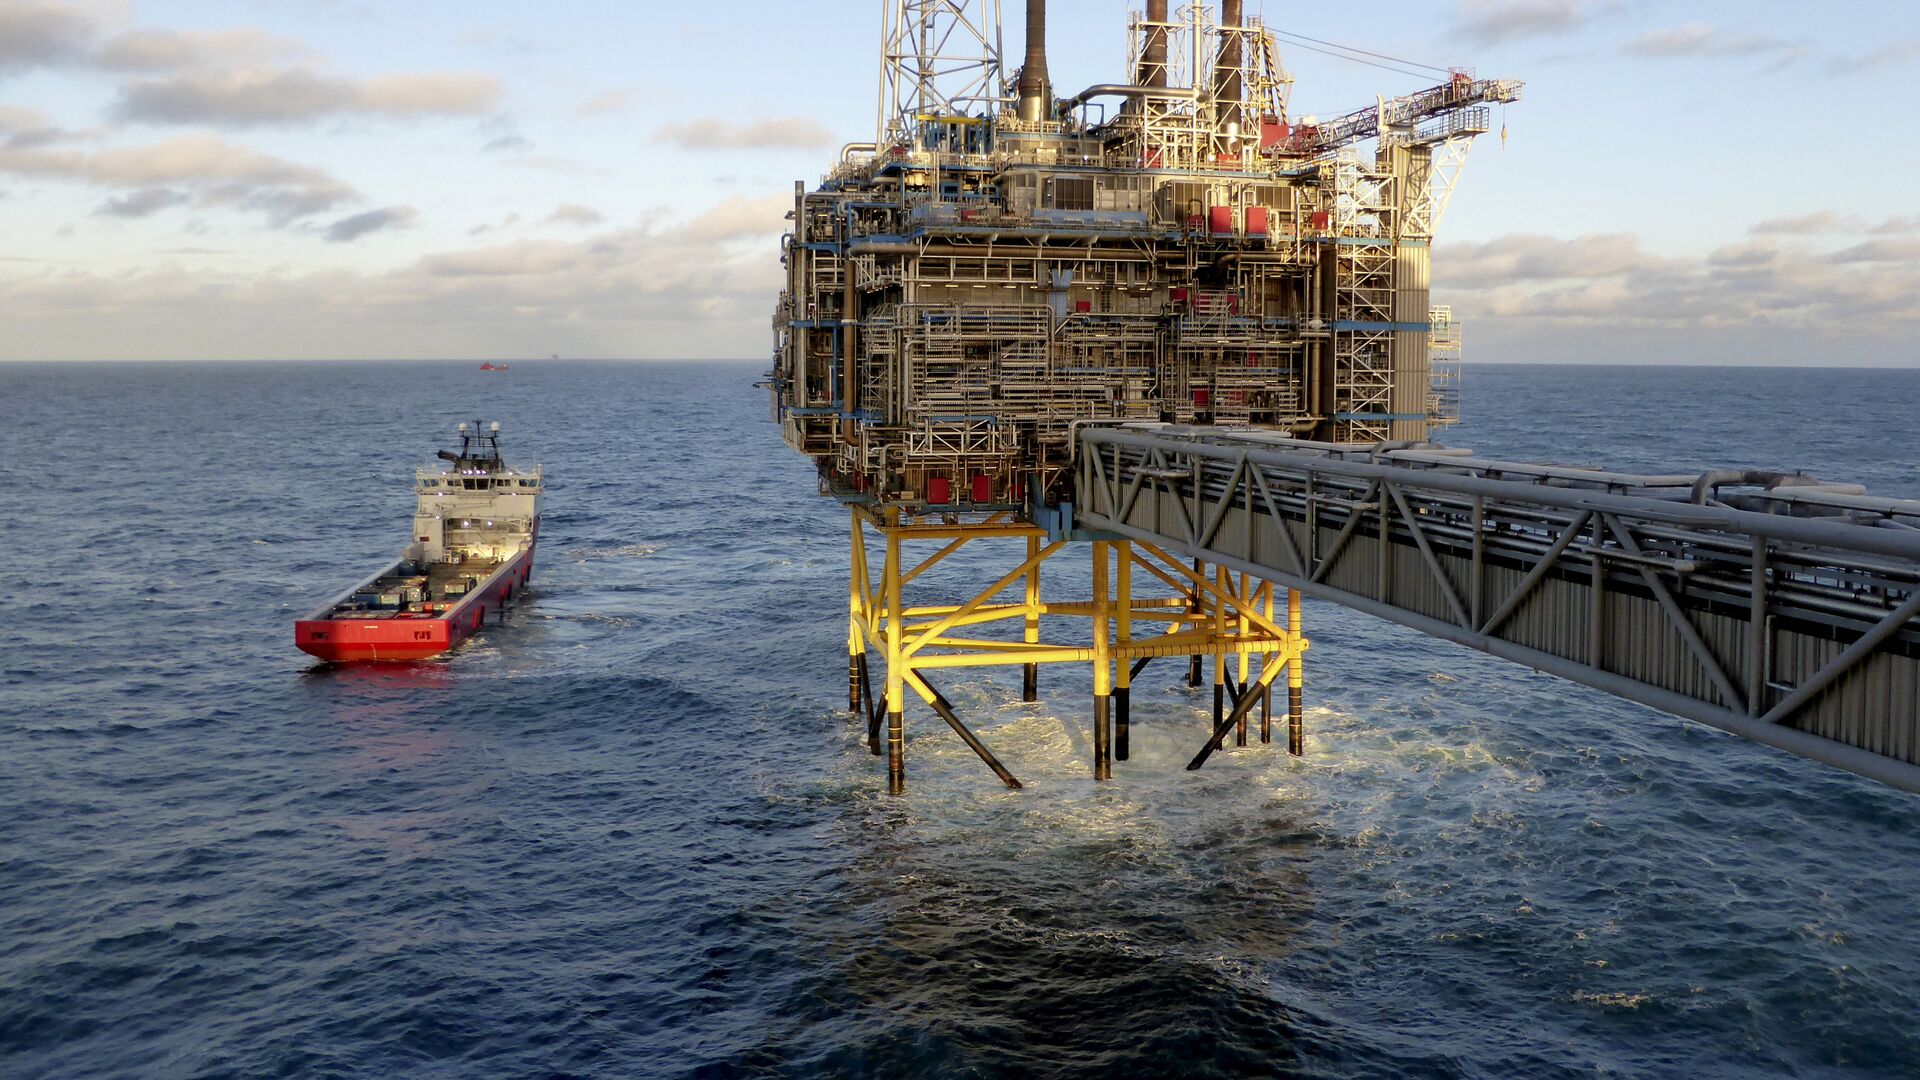 Oil and gas company Statoil gas processing and CO2 removal platform Sleipner T is pictured in the offshore near the Stavanger, Norway, February 11, 2016 - Sputnik International, 1920, 28.01.2022